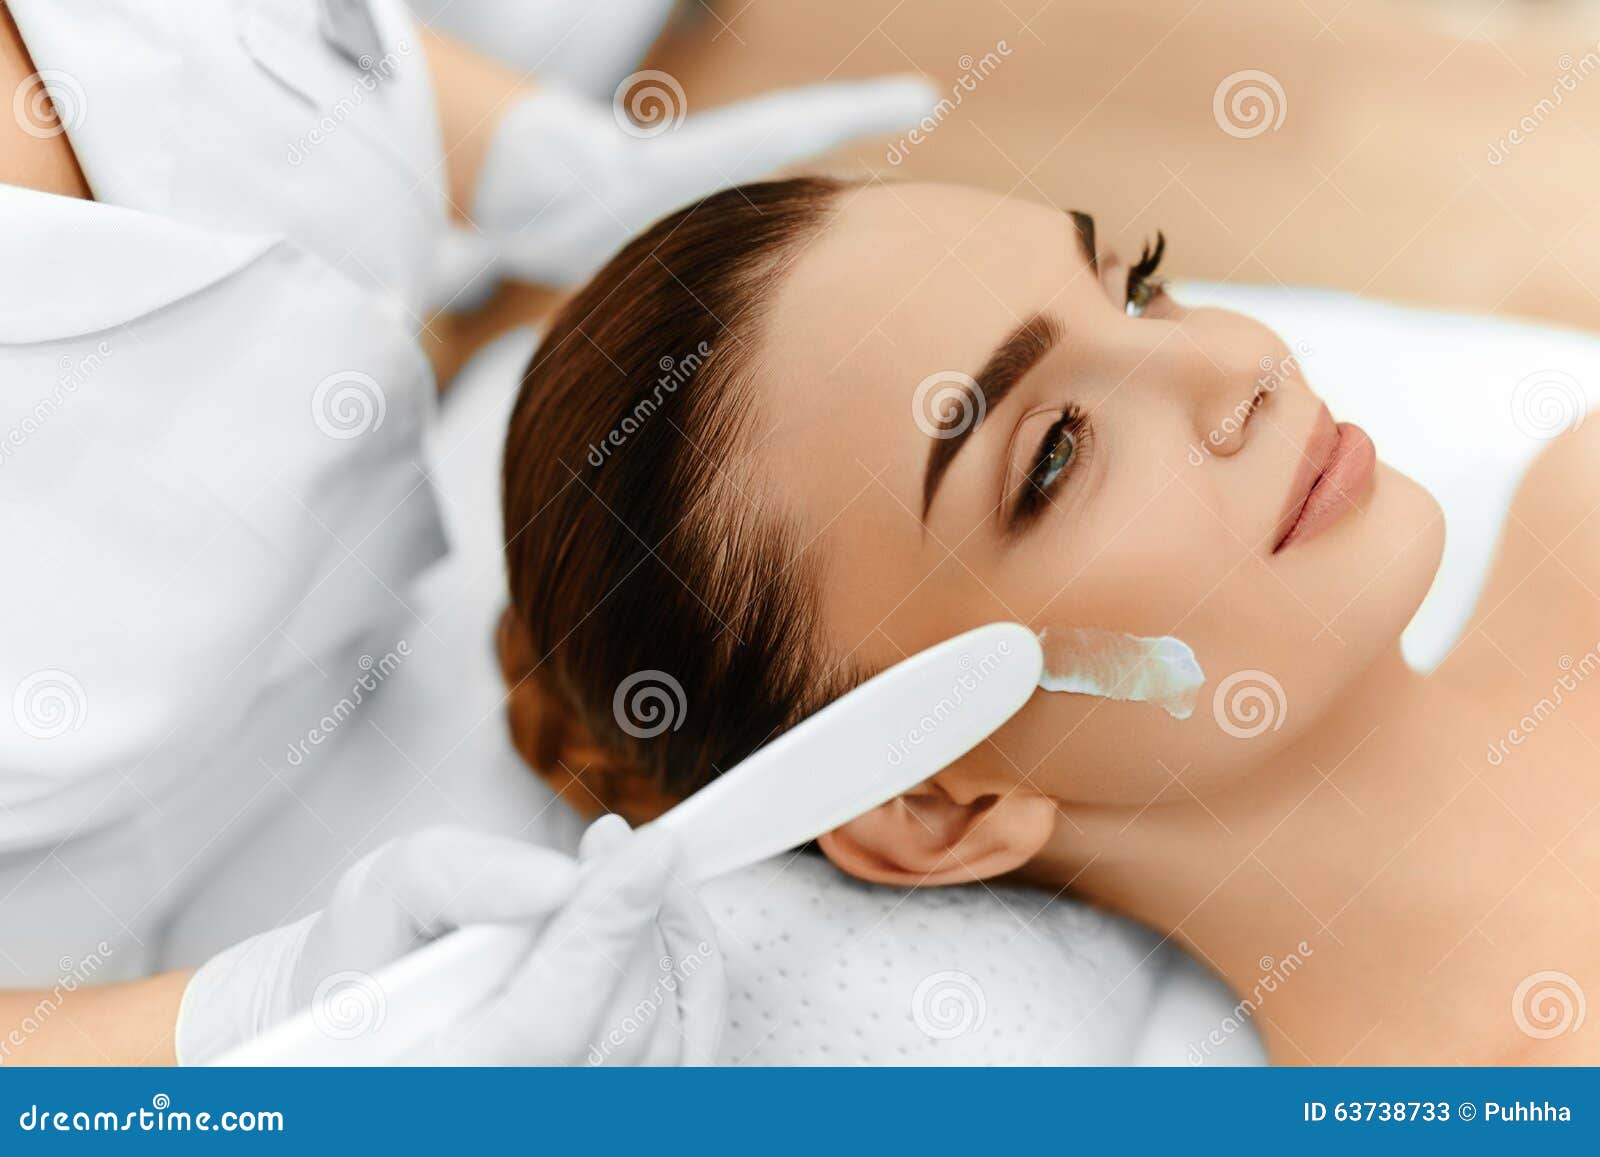 skin care. cosmetic cream on woman's face. beauty spa treatment